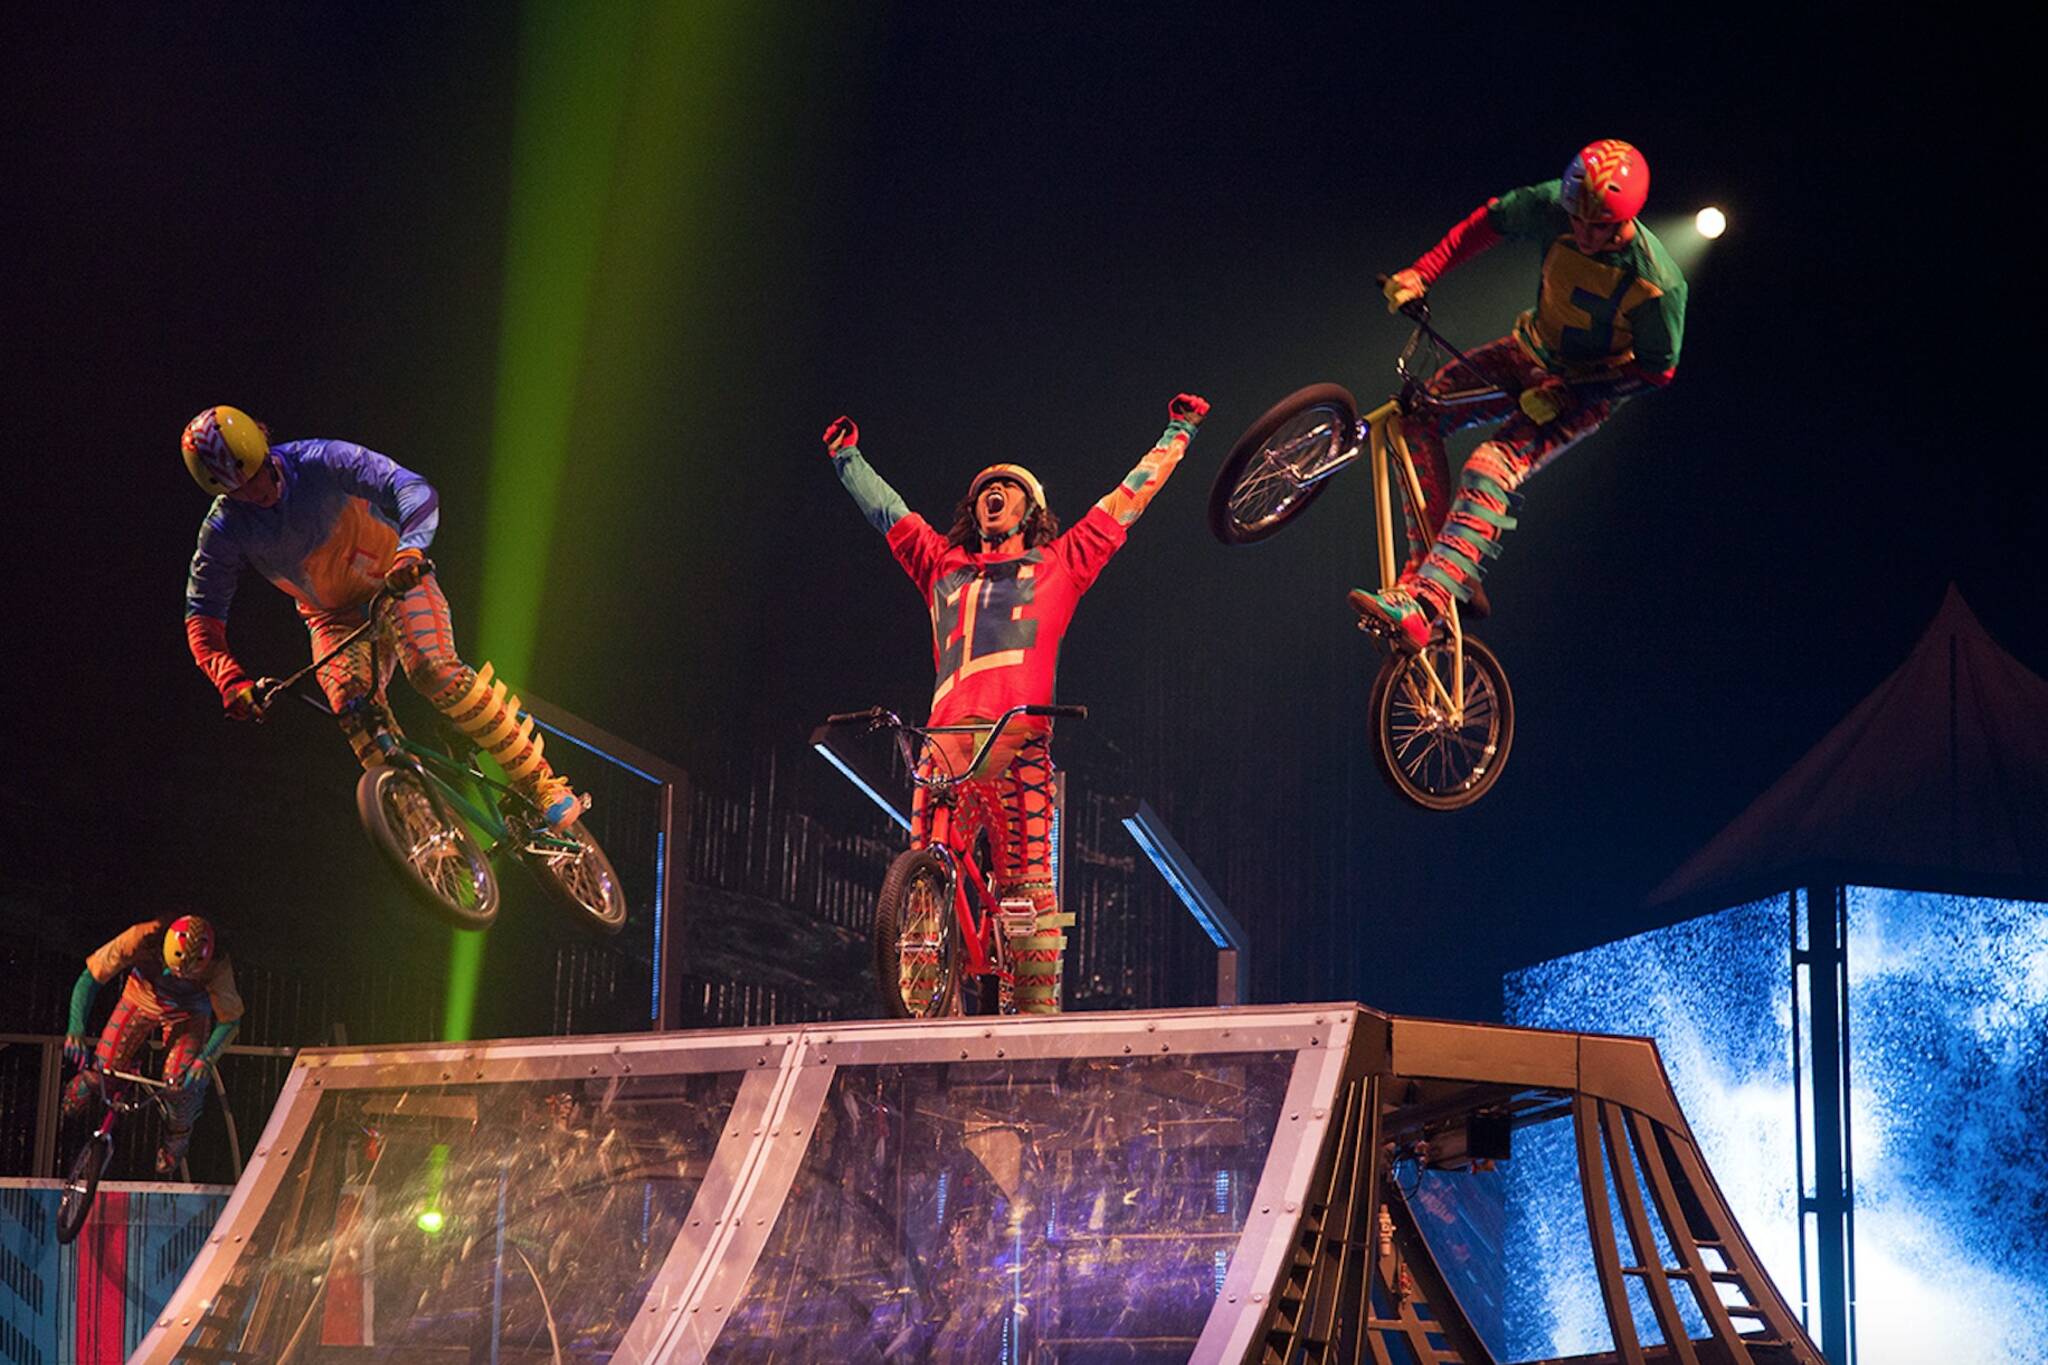 Cirque du Soleil is coming back to Toronto